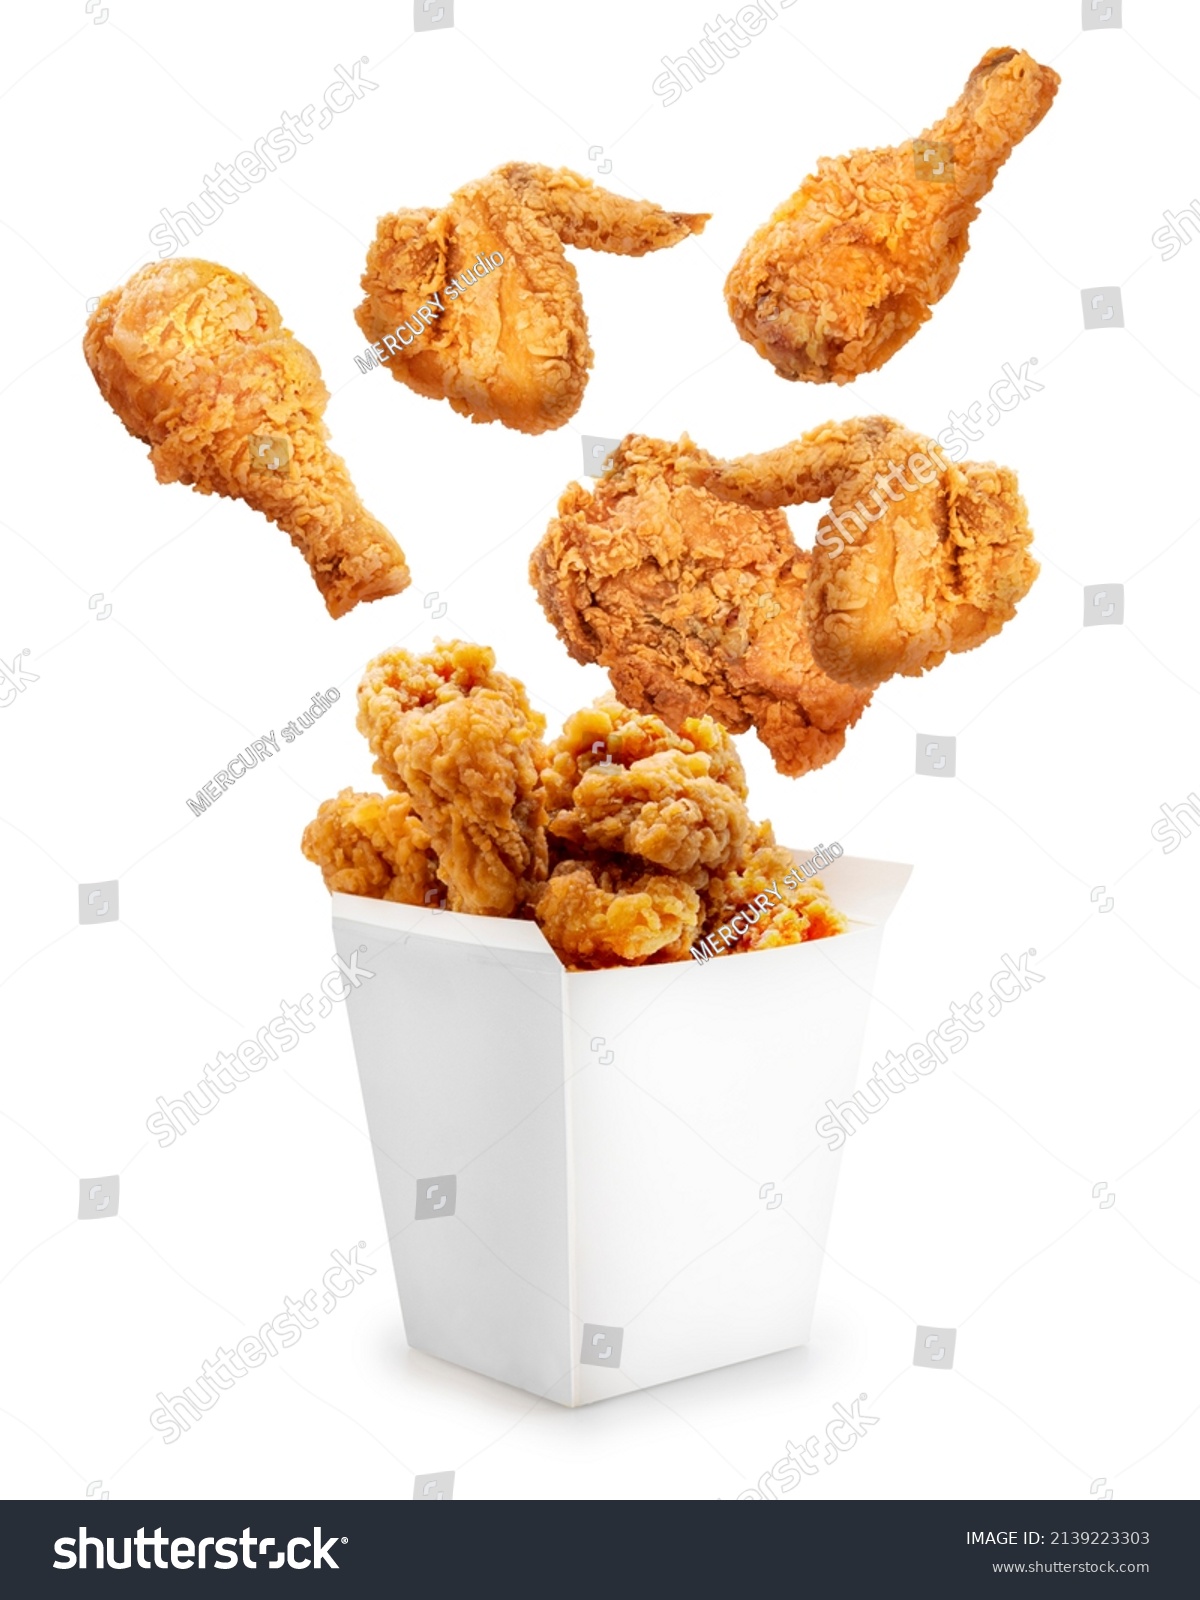 Fried chicken flying out of paper bucket isolated on white background, Fried chicken on white With clipping path. #2139223303